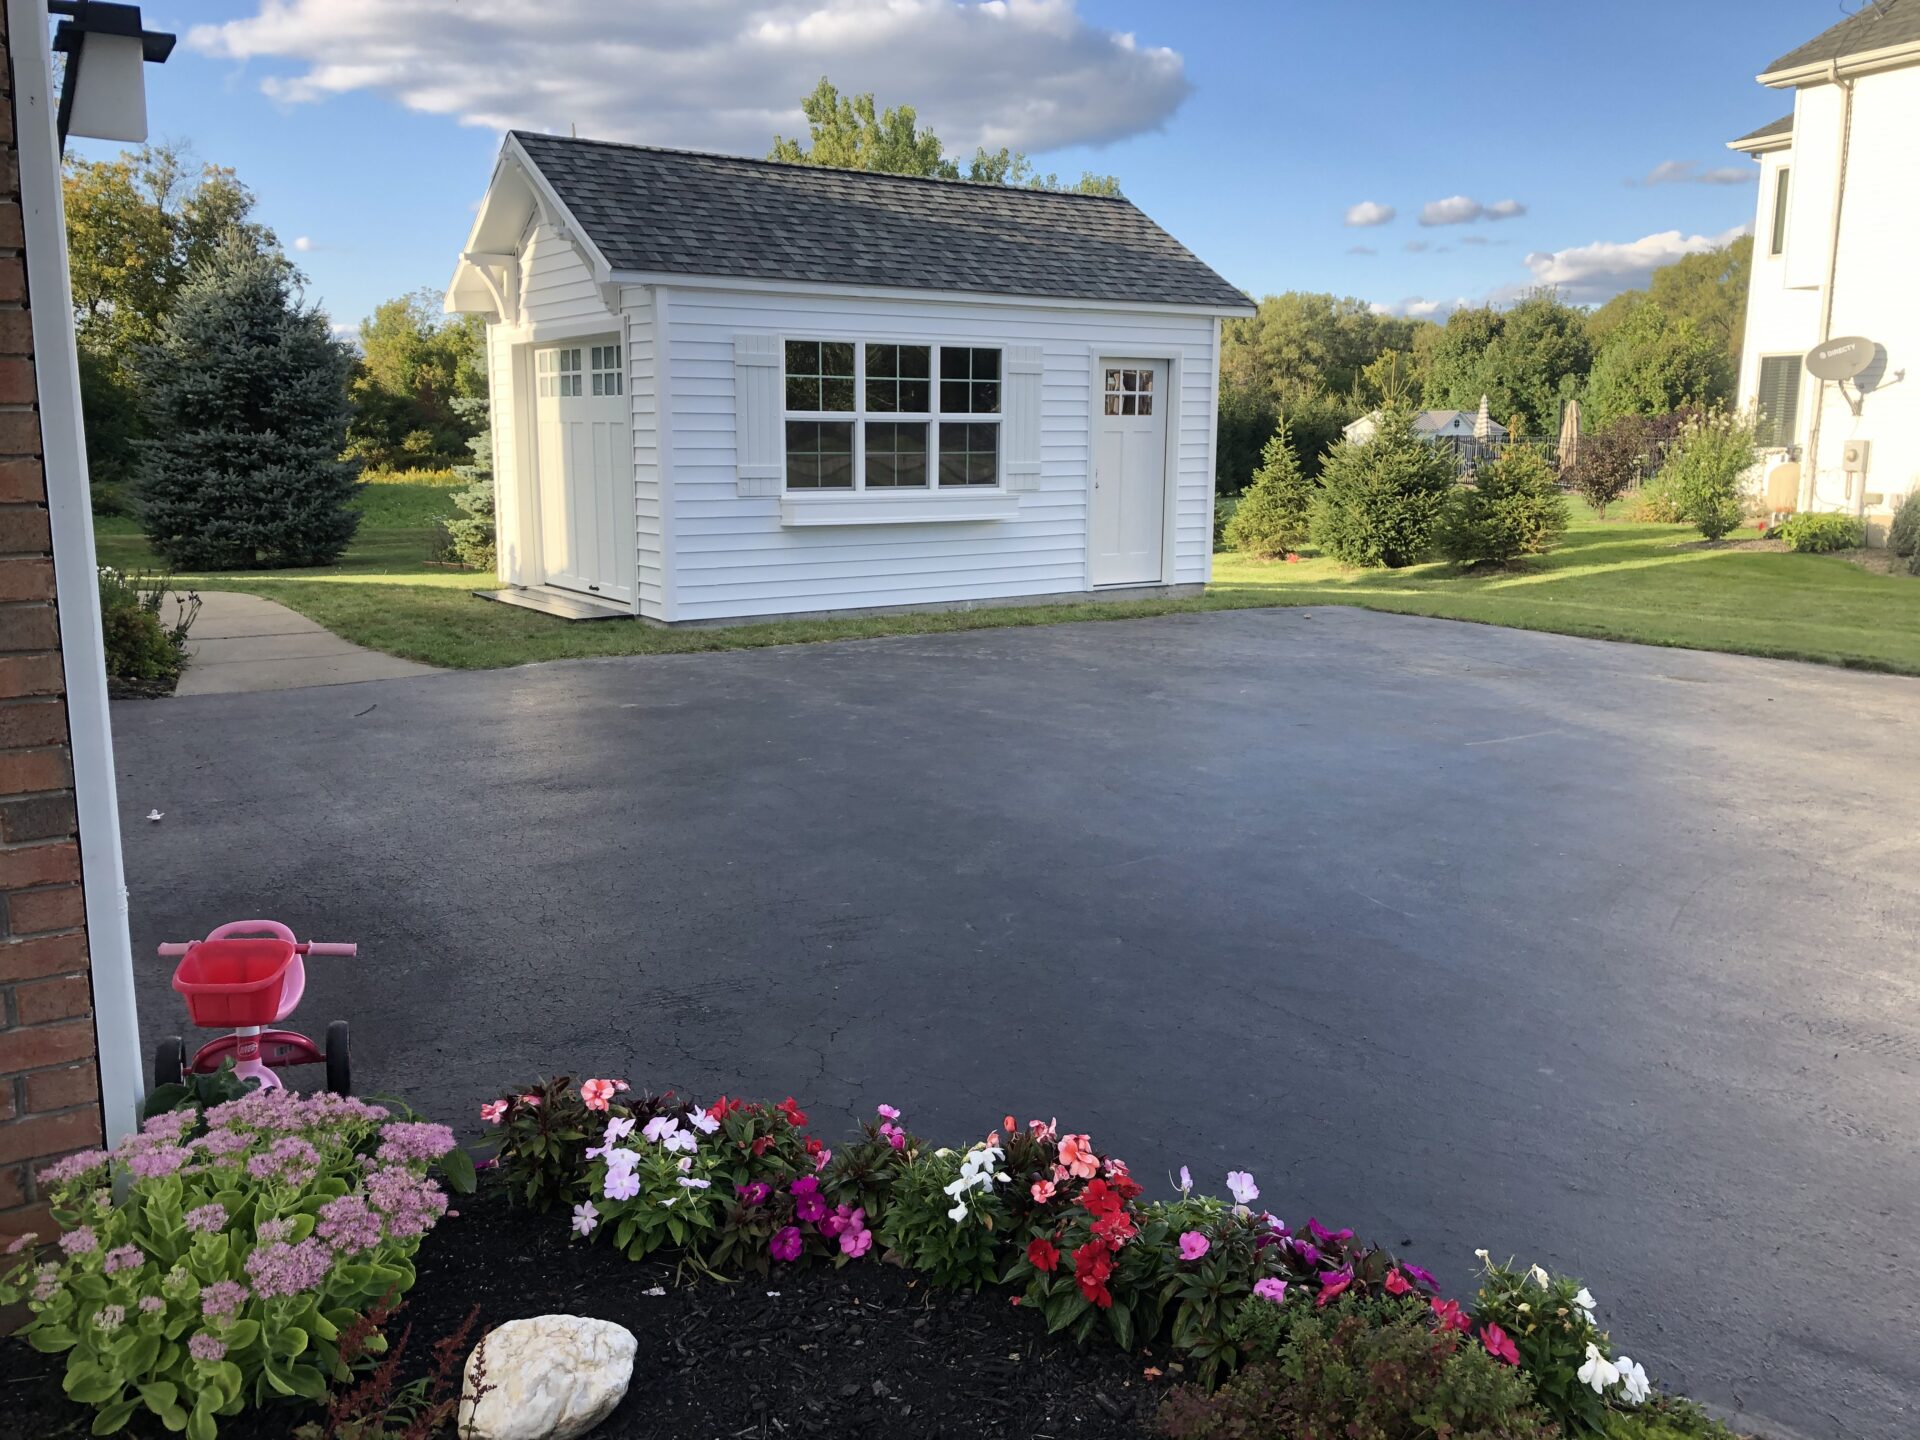 A white shed sitting in the middle of a driveway.